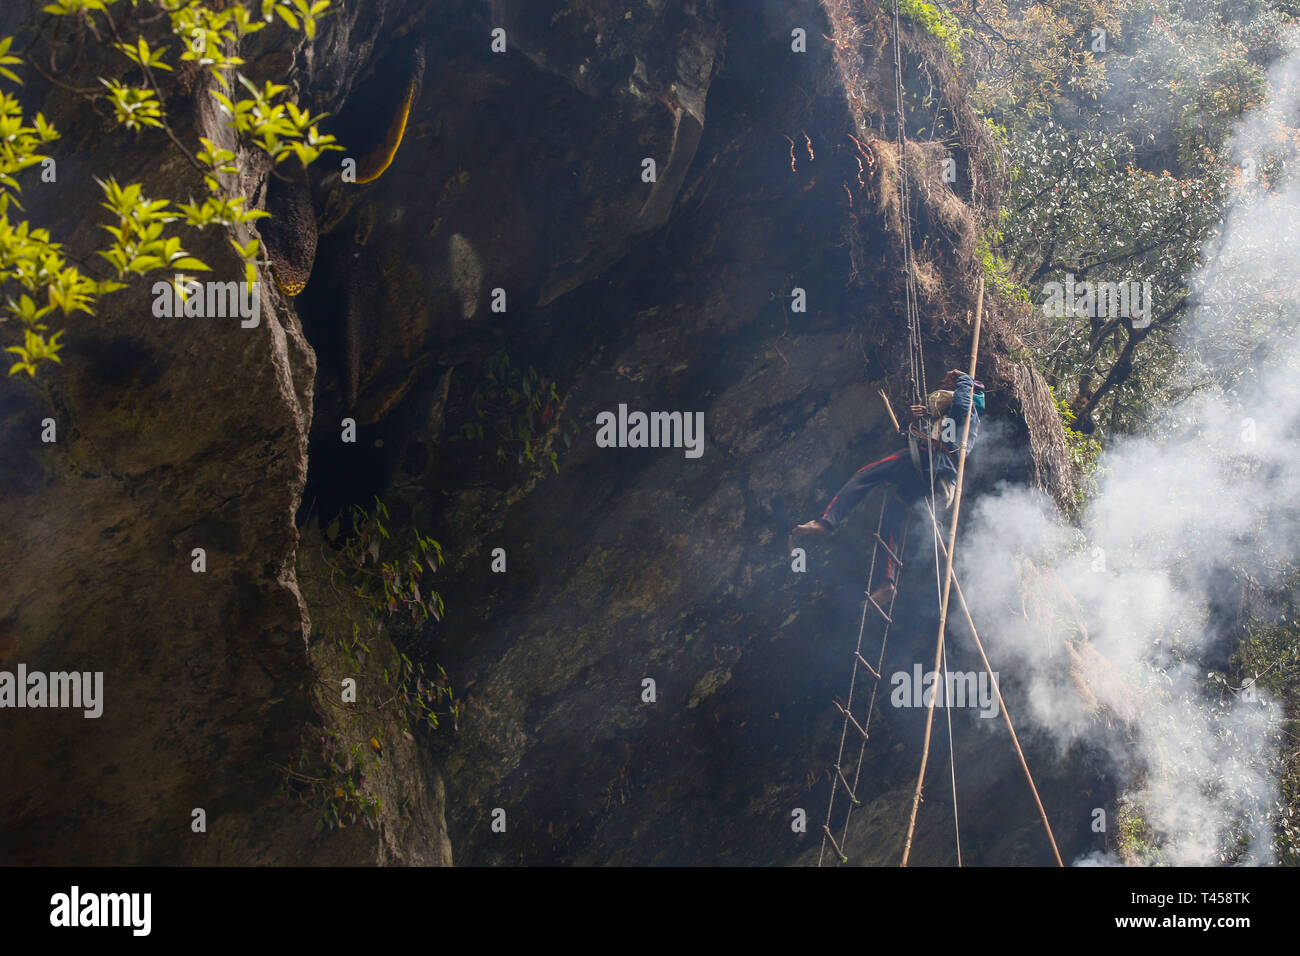 A hunter seen harvesting honey from the cliffs, hanging on the rope ladder. Hunters climb up to 300 feet at the cliffs to harvest honey. October, November, April, May and June are the best seasons to harvest honey. Stock Photo